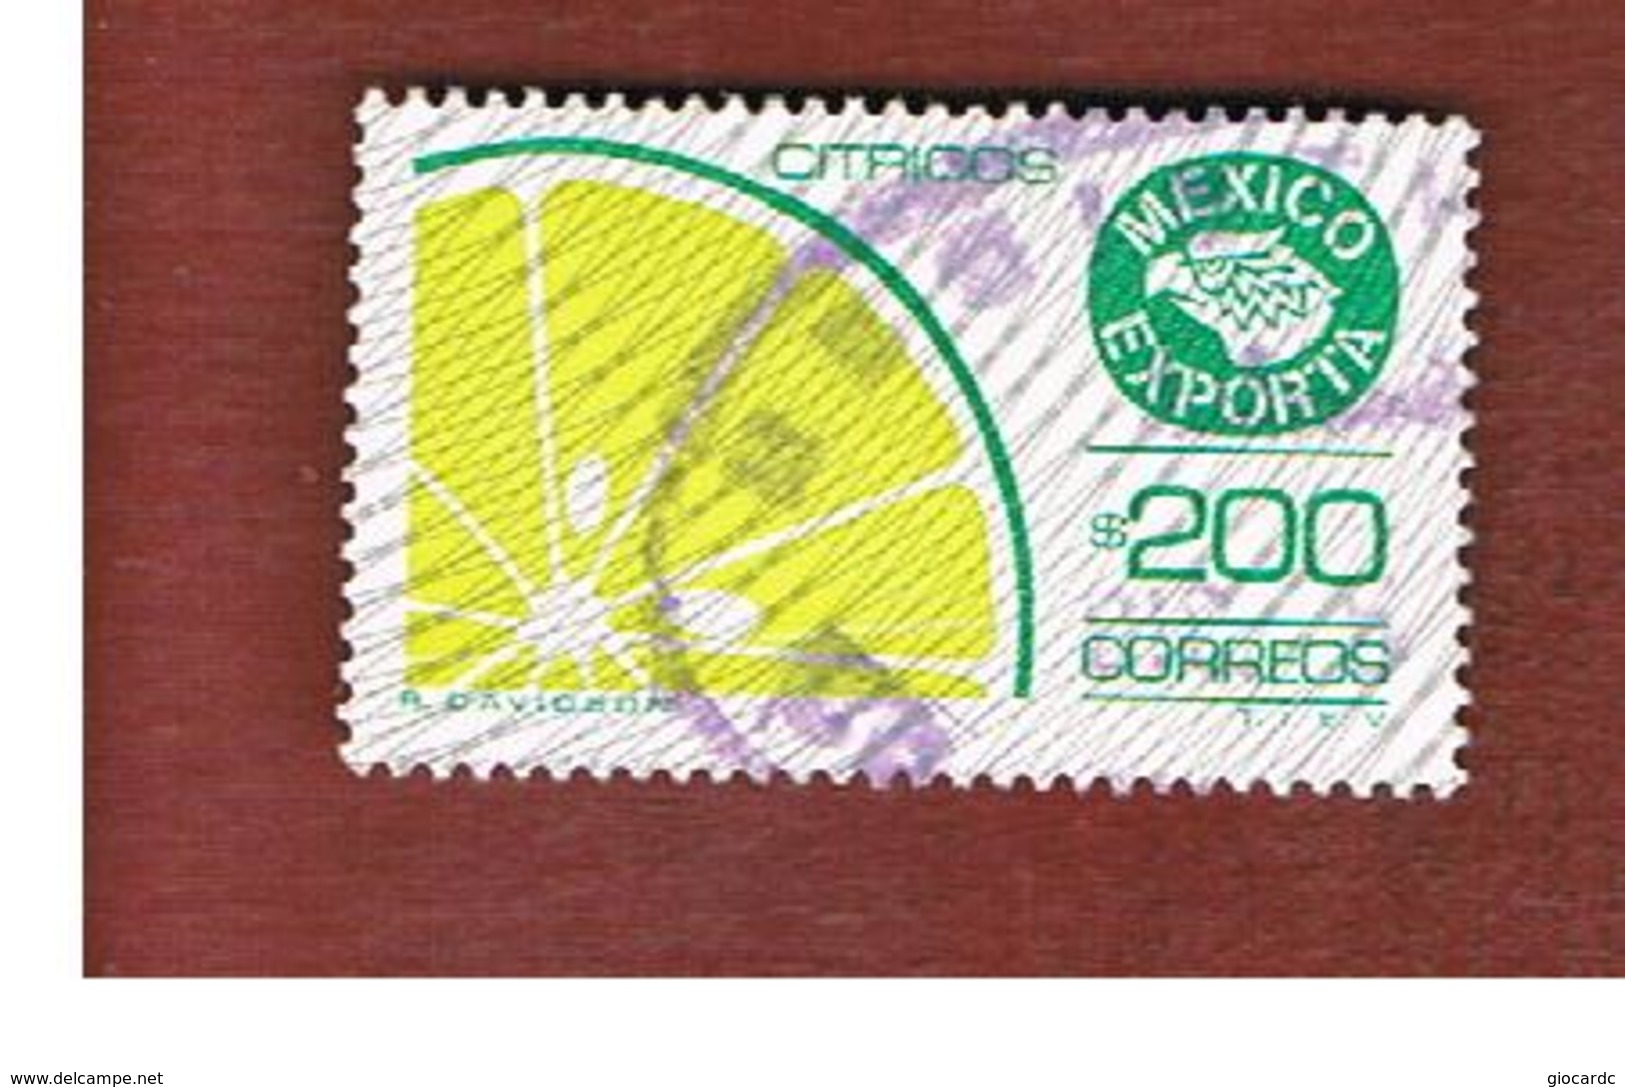 MESSICO (MEXICO) -  SG 1360f   - 1983    MEXICAN EXPORTS:   CITRUS  FRUIT          -  USED° - Messico